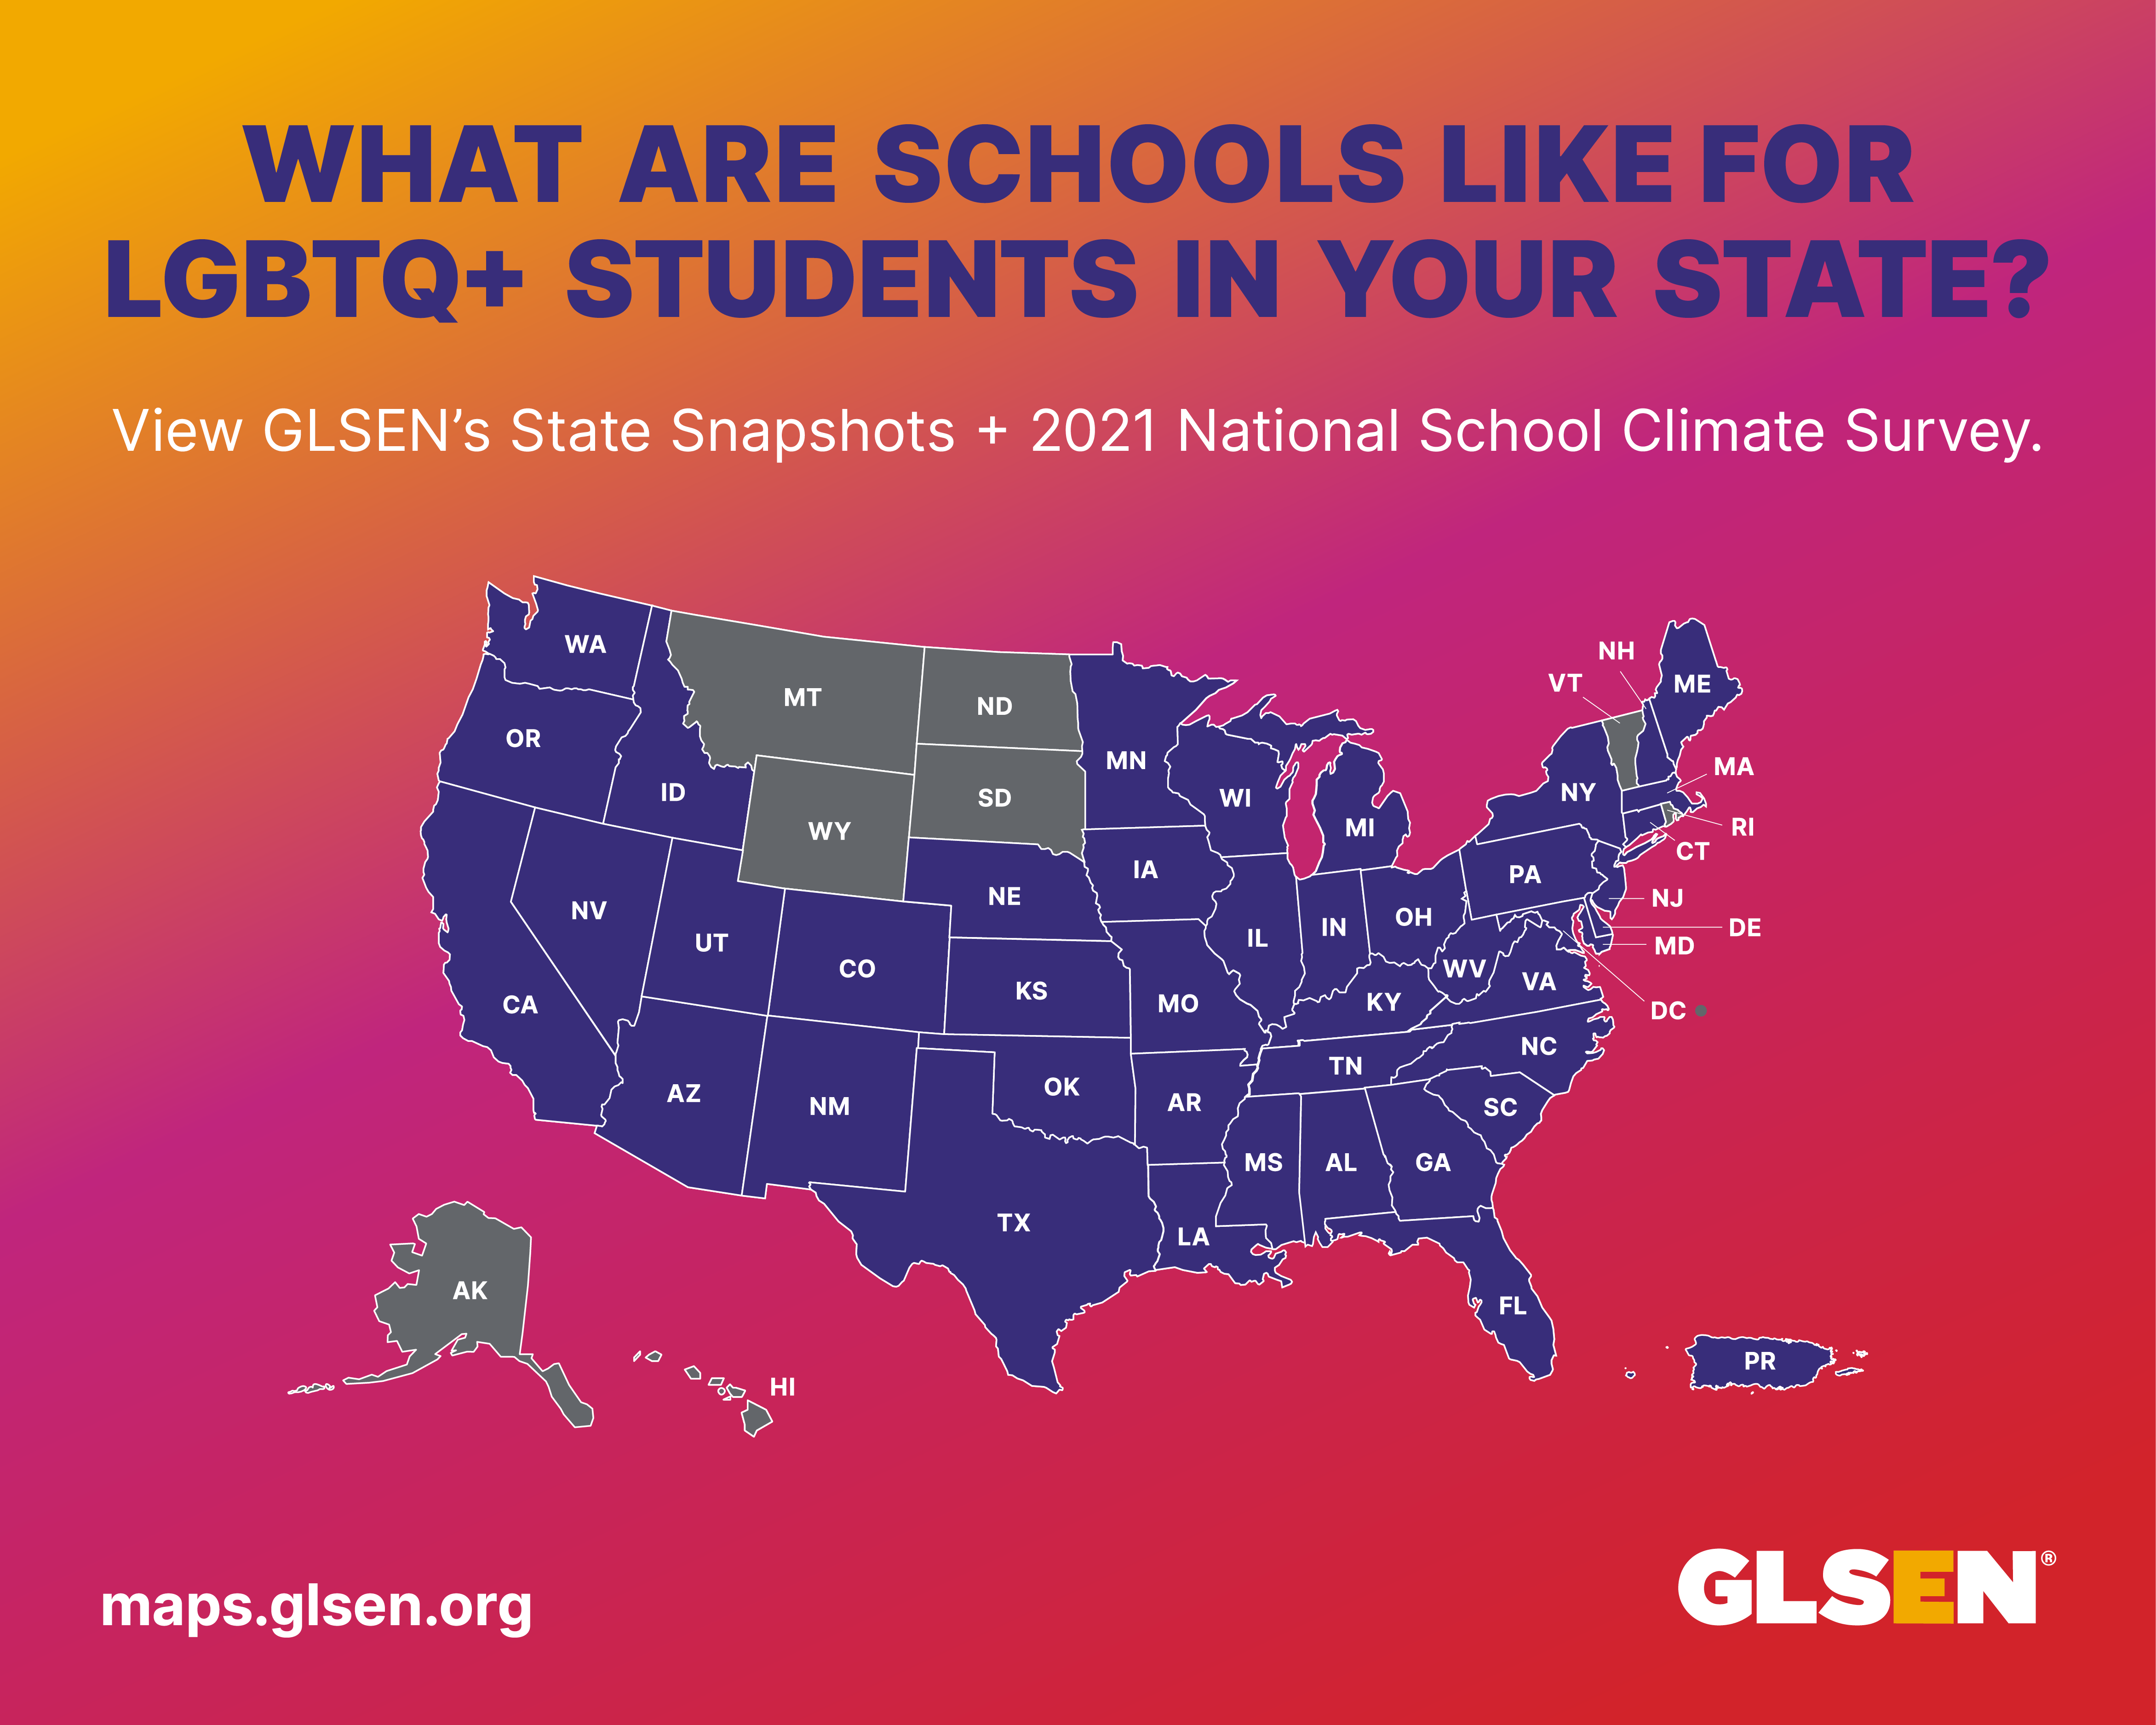 Map of states within the U.S. where GLSEN has state research snapshots available via the GLSEN Navigator, maps.glsen.org